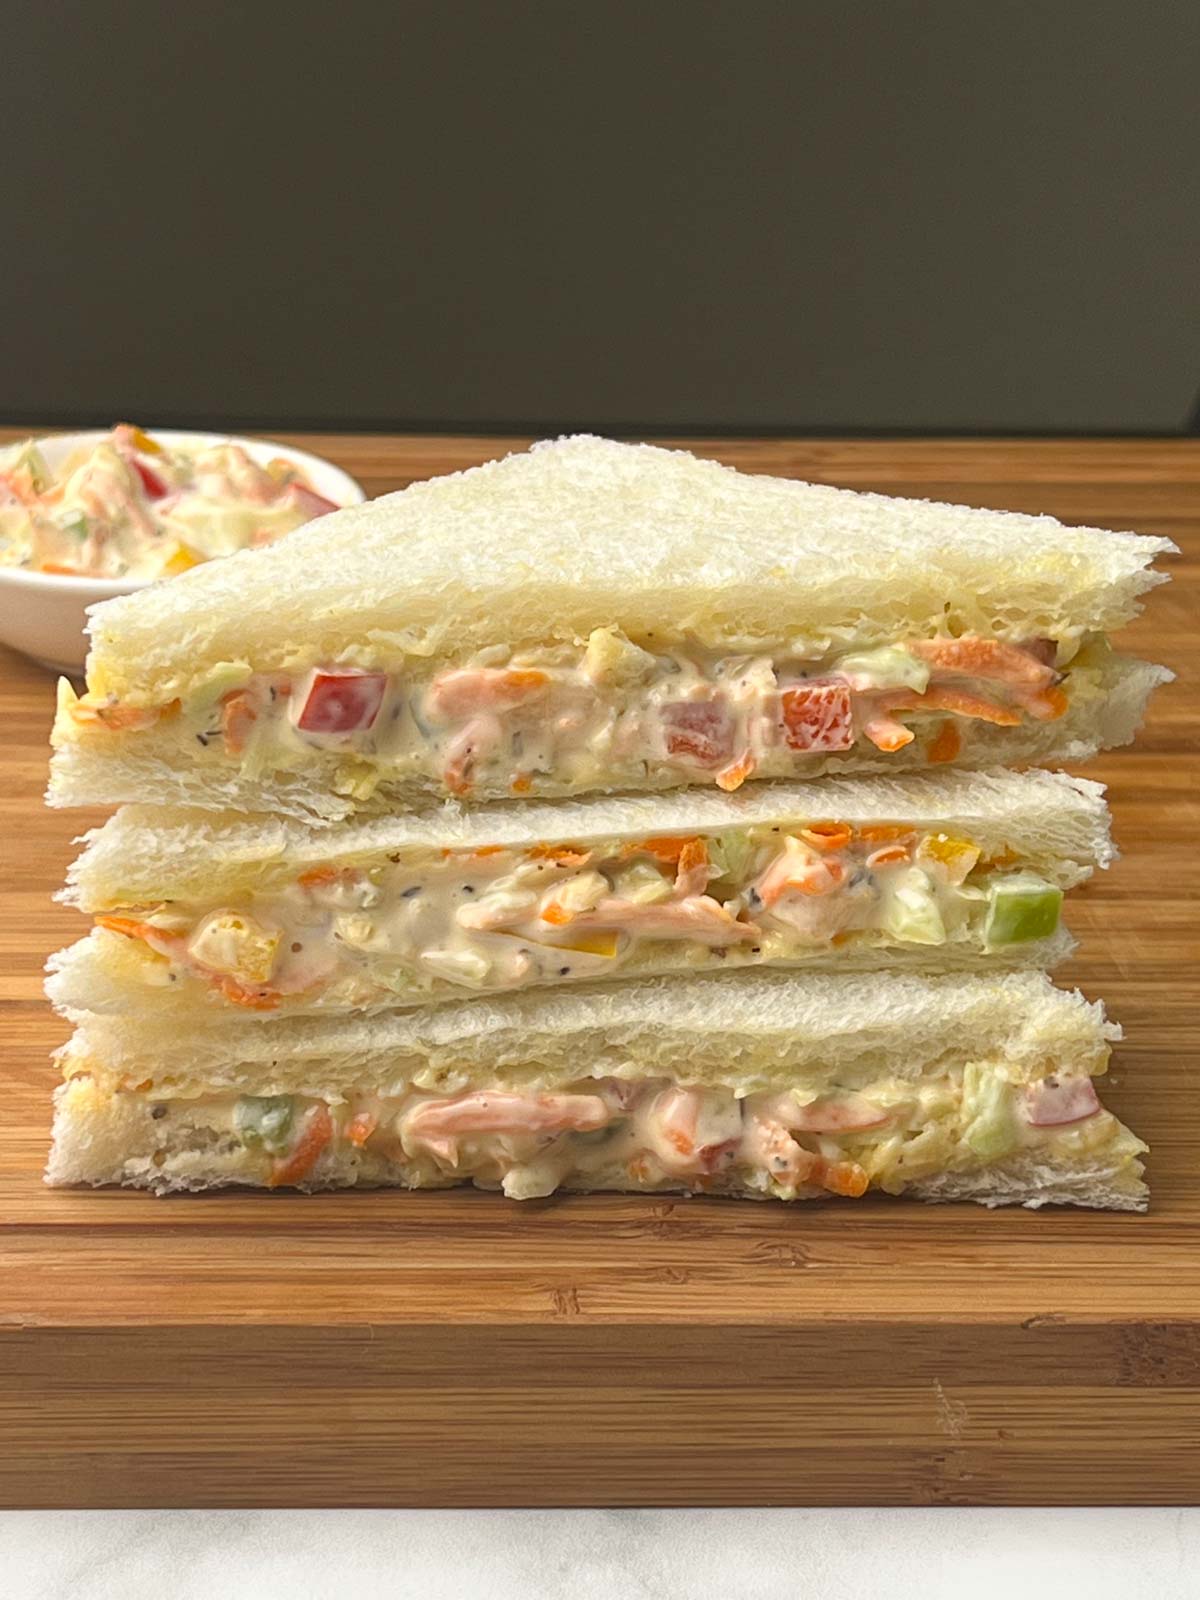 vegetable mayonnaise sandwich stacked on one another on a wooden board